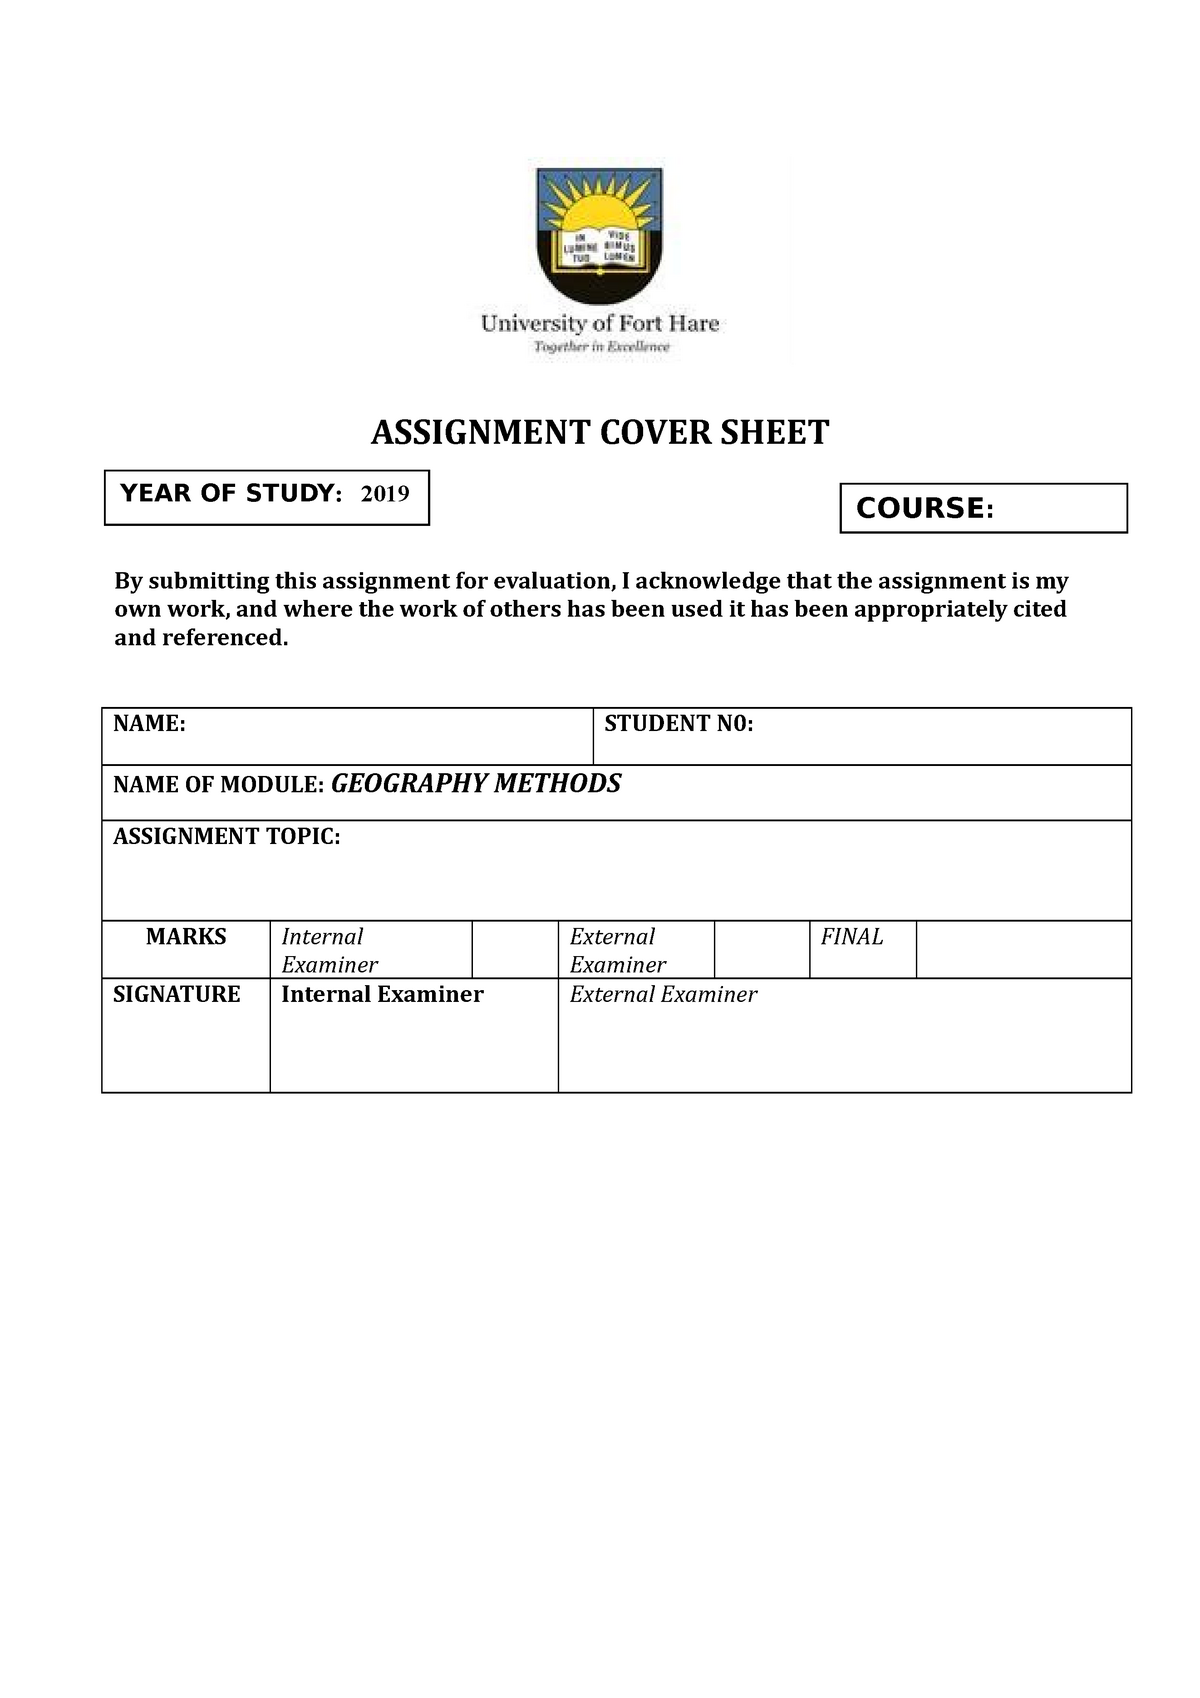 aut assignment cover sheet for individual work